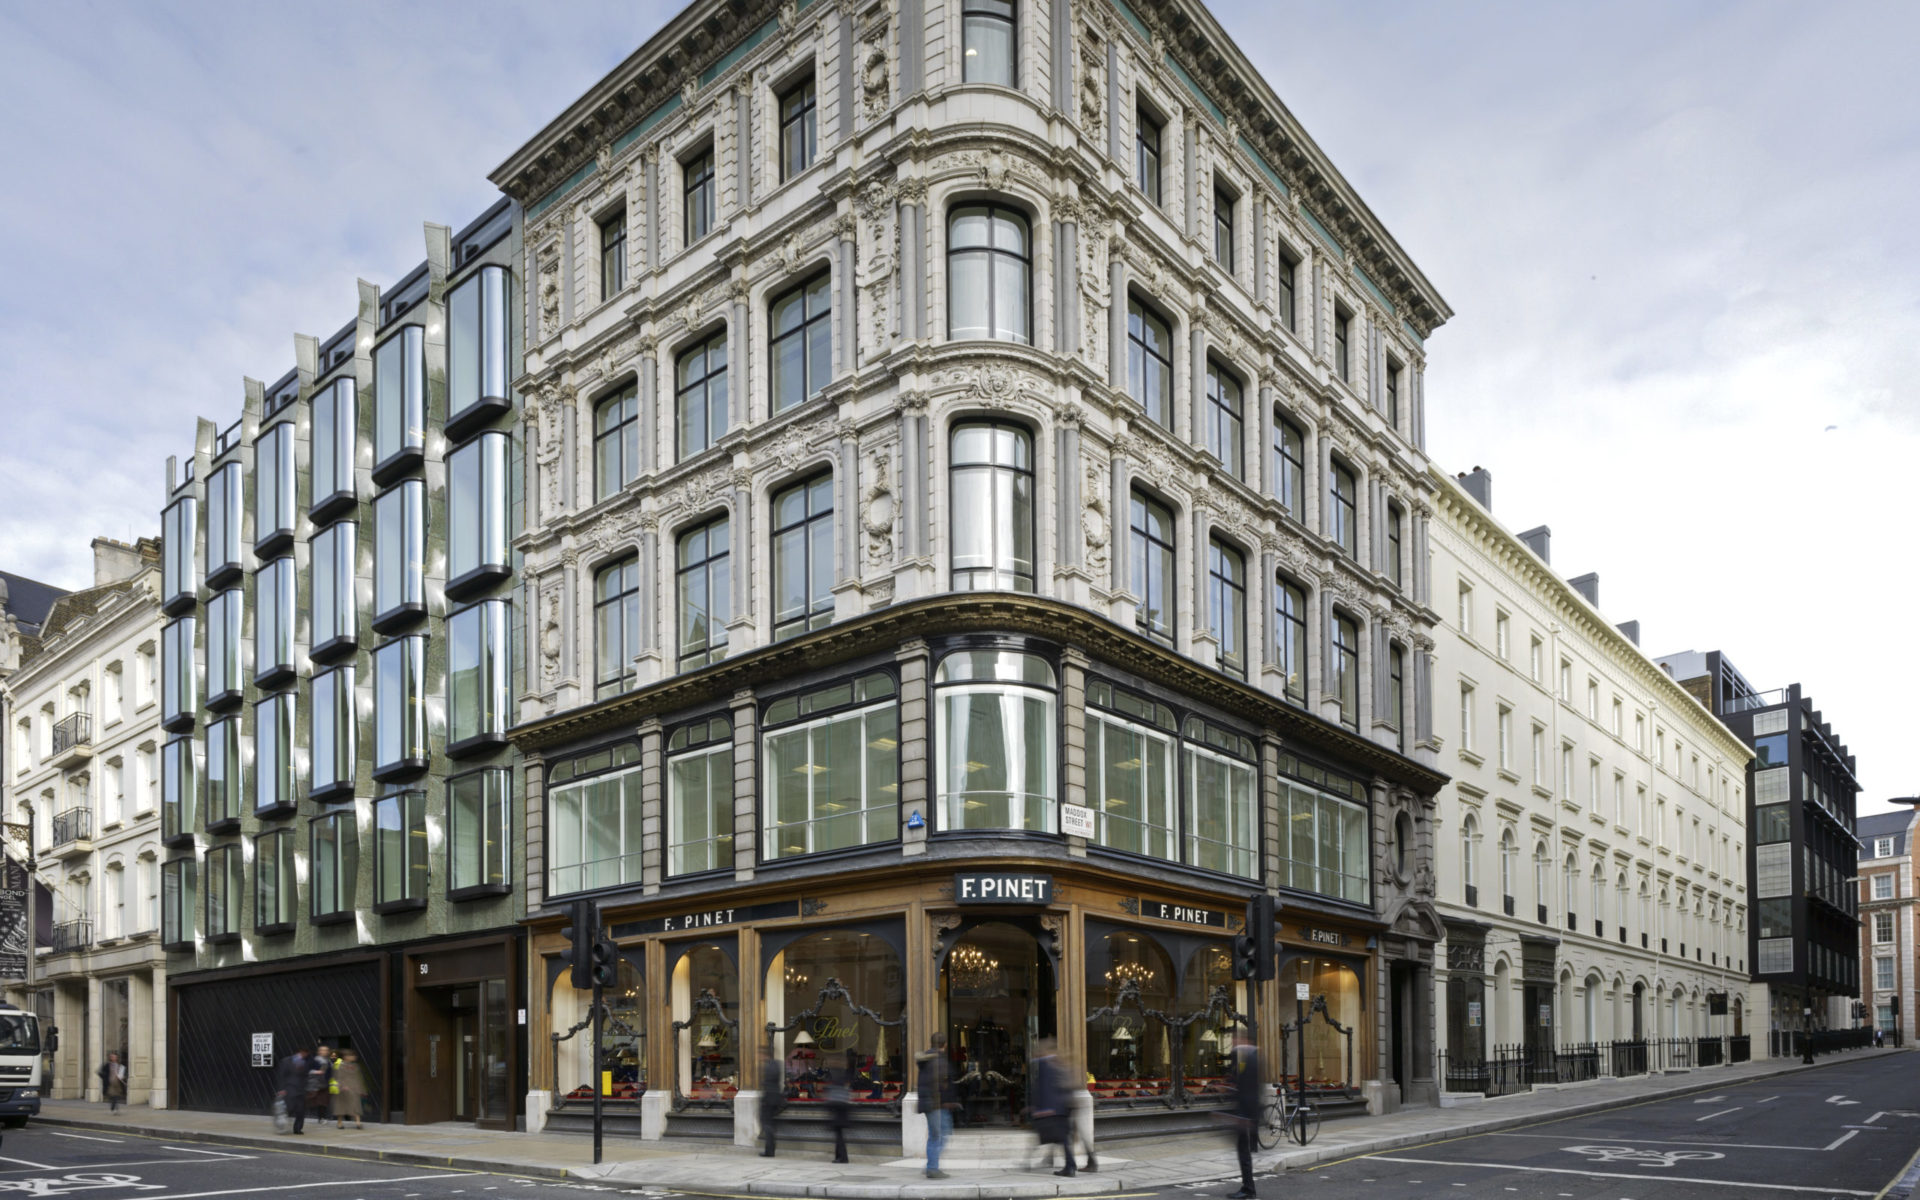 50 New Bond Street, London by Eric Parry Architects